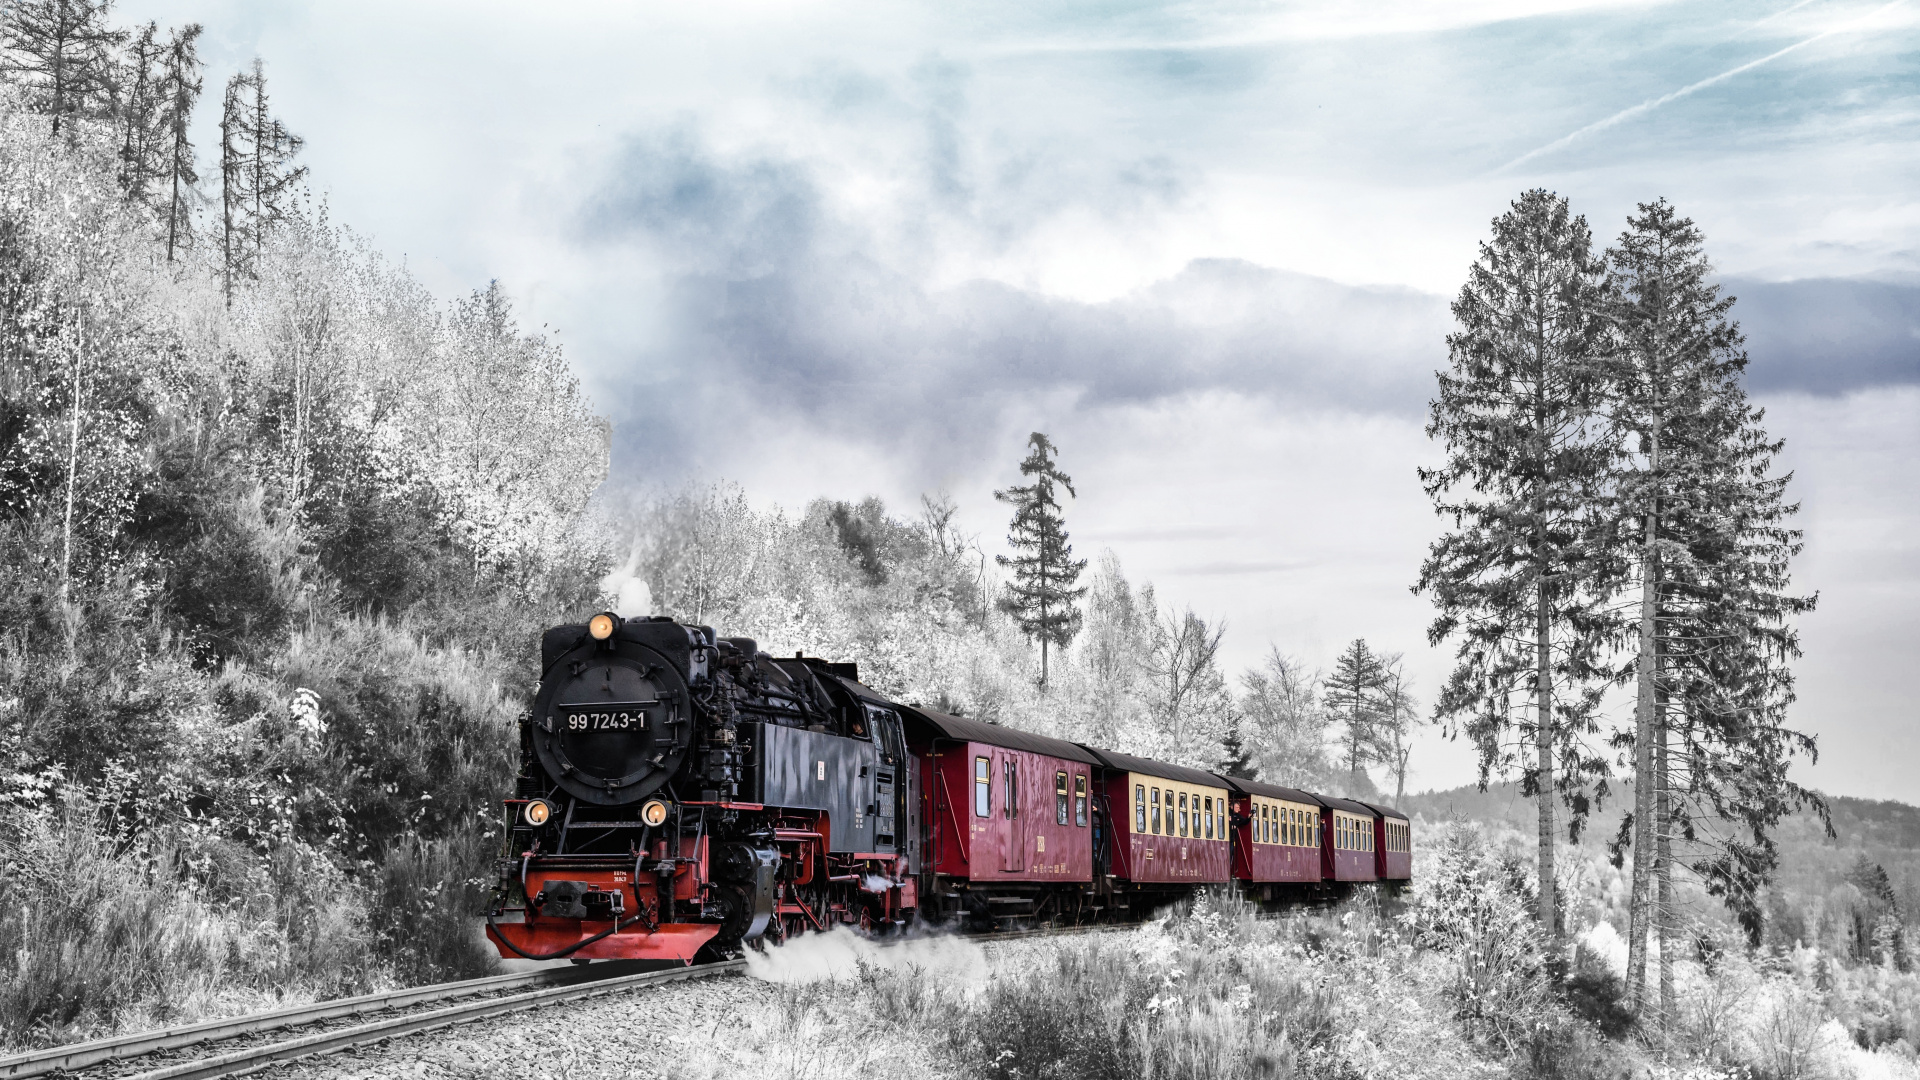 Red and Black Train on Rail Tracks Under Cloudy Sky. Wallpaper in 1920x1080 Resolution